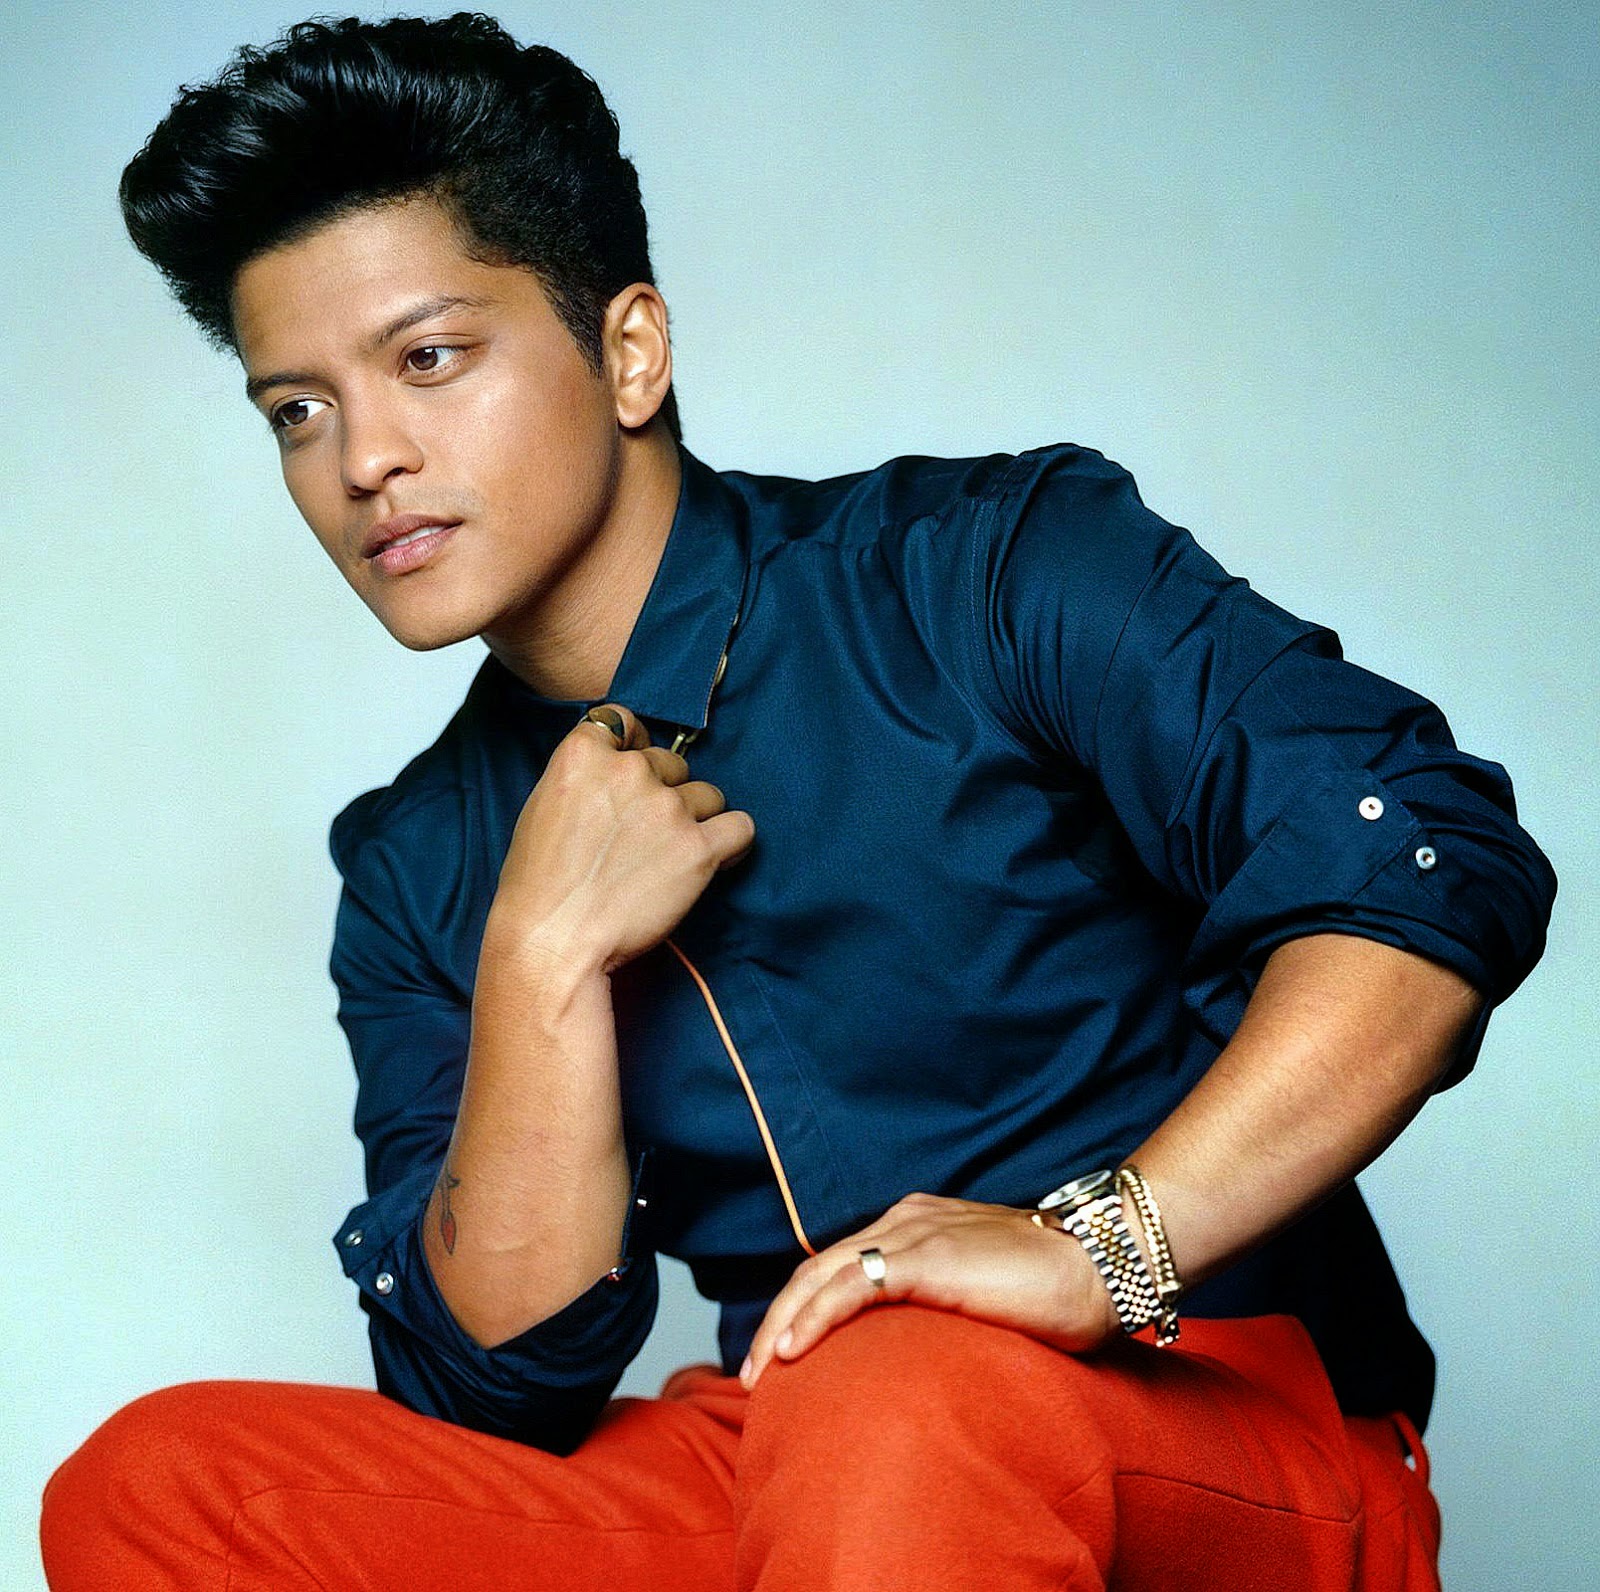 Oyster case---Bruno Mars with Rolex Day-Date watch